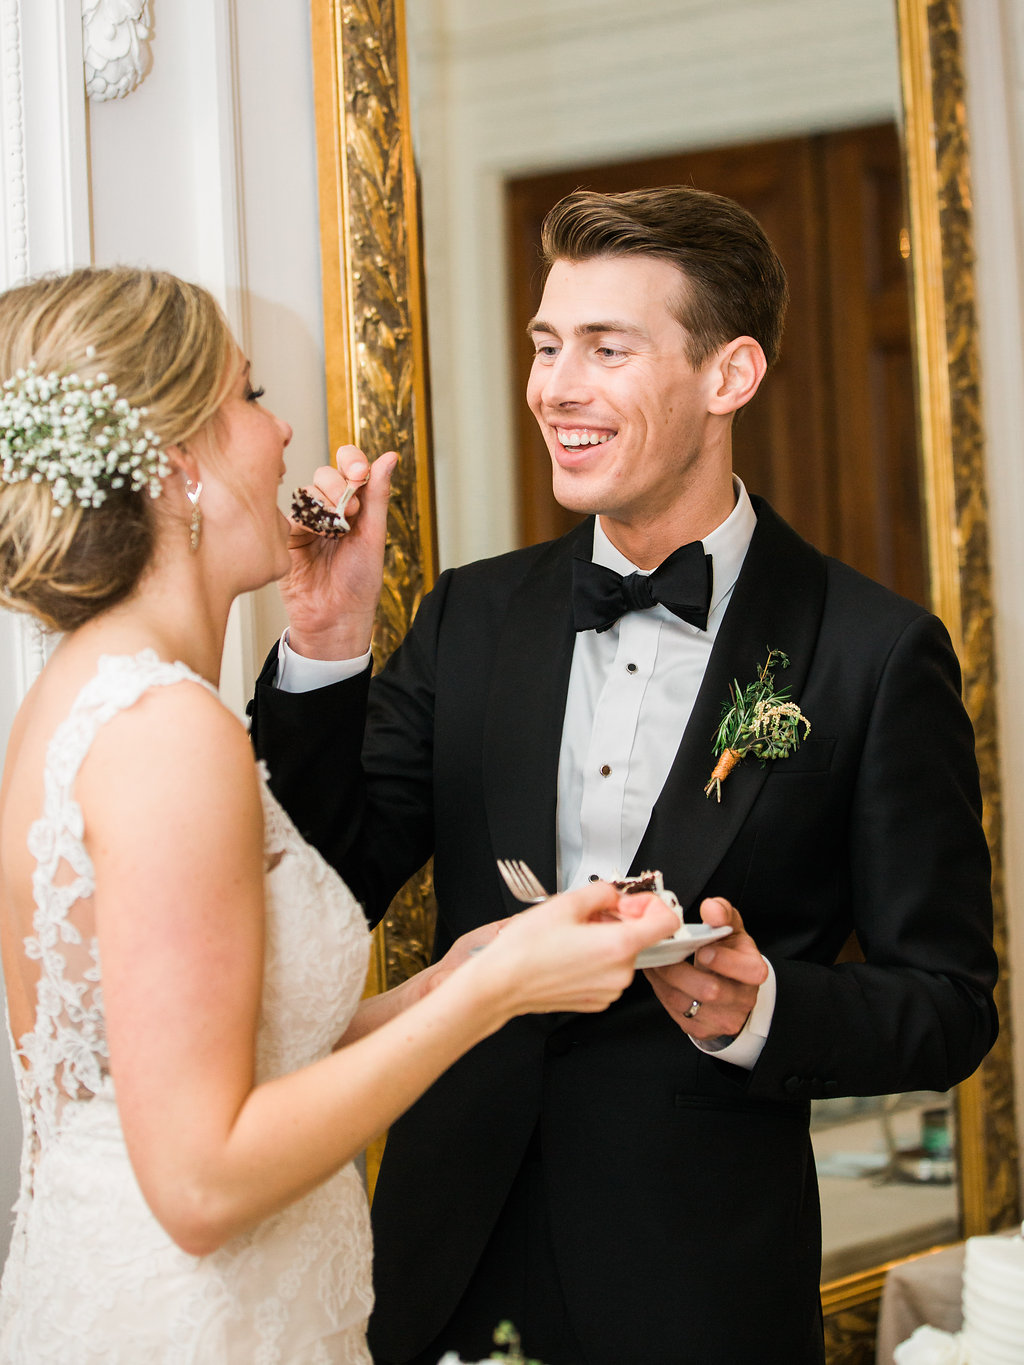 Copper and White DC Wedding Reception at DAR. DC Wedding Planner Bright Occasions. Photo by Lissa Ryan Photography